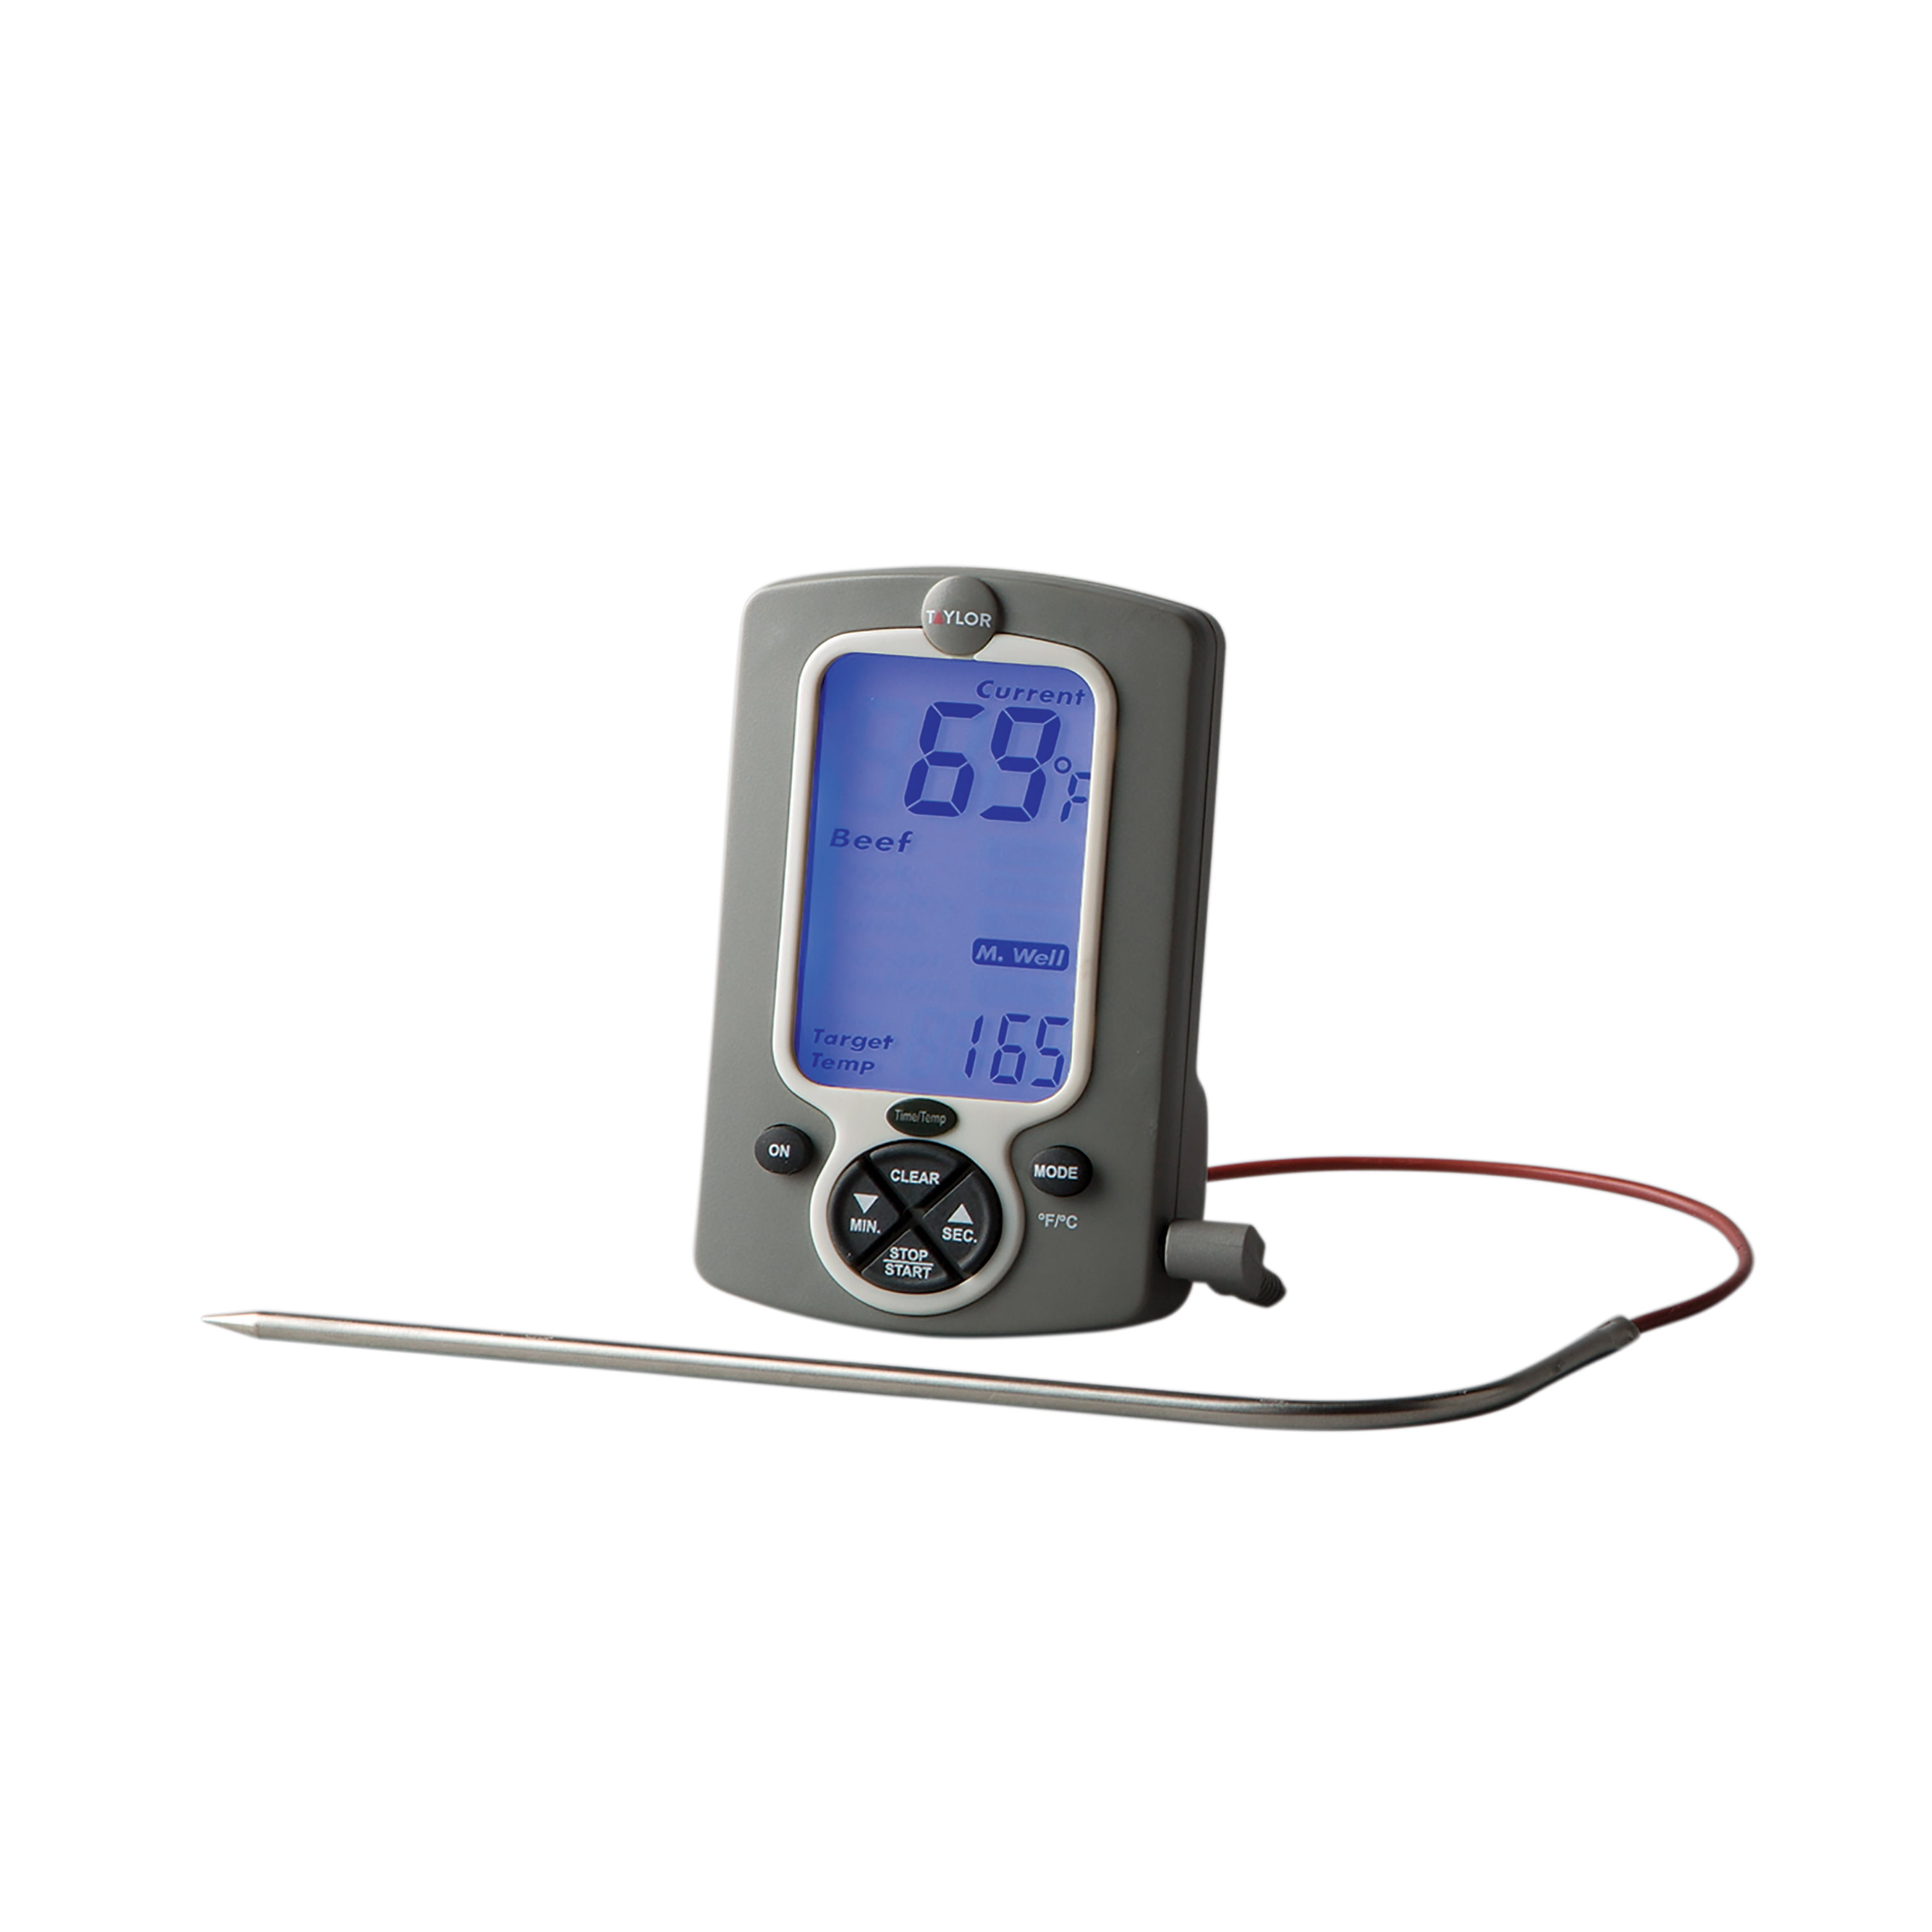 Digital Wired Probe Thermometer with Bright Backlit Display, Presets, and Timer - Walmart.com